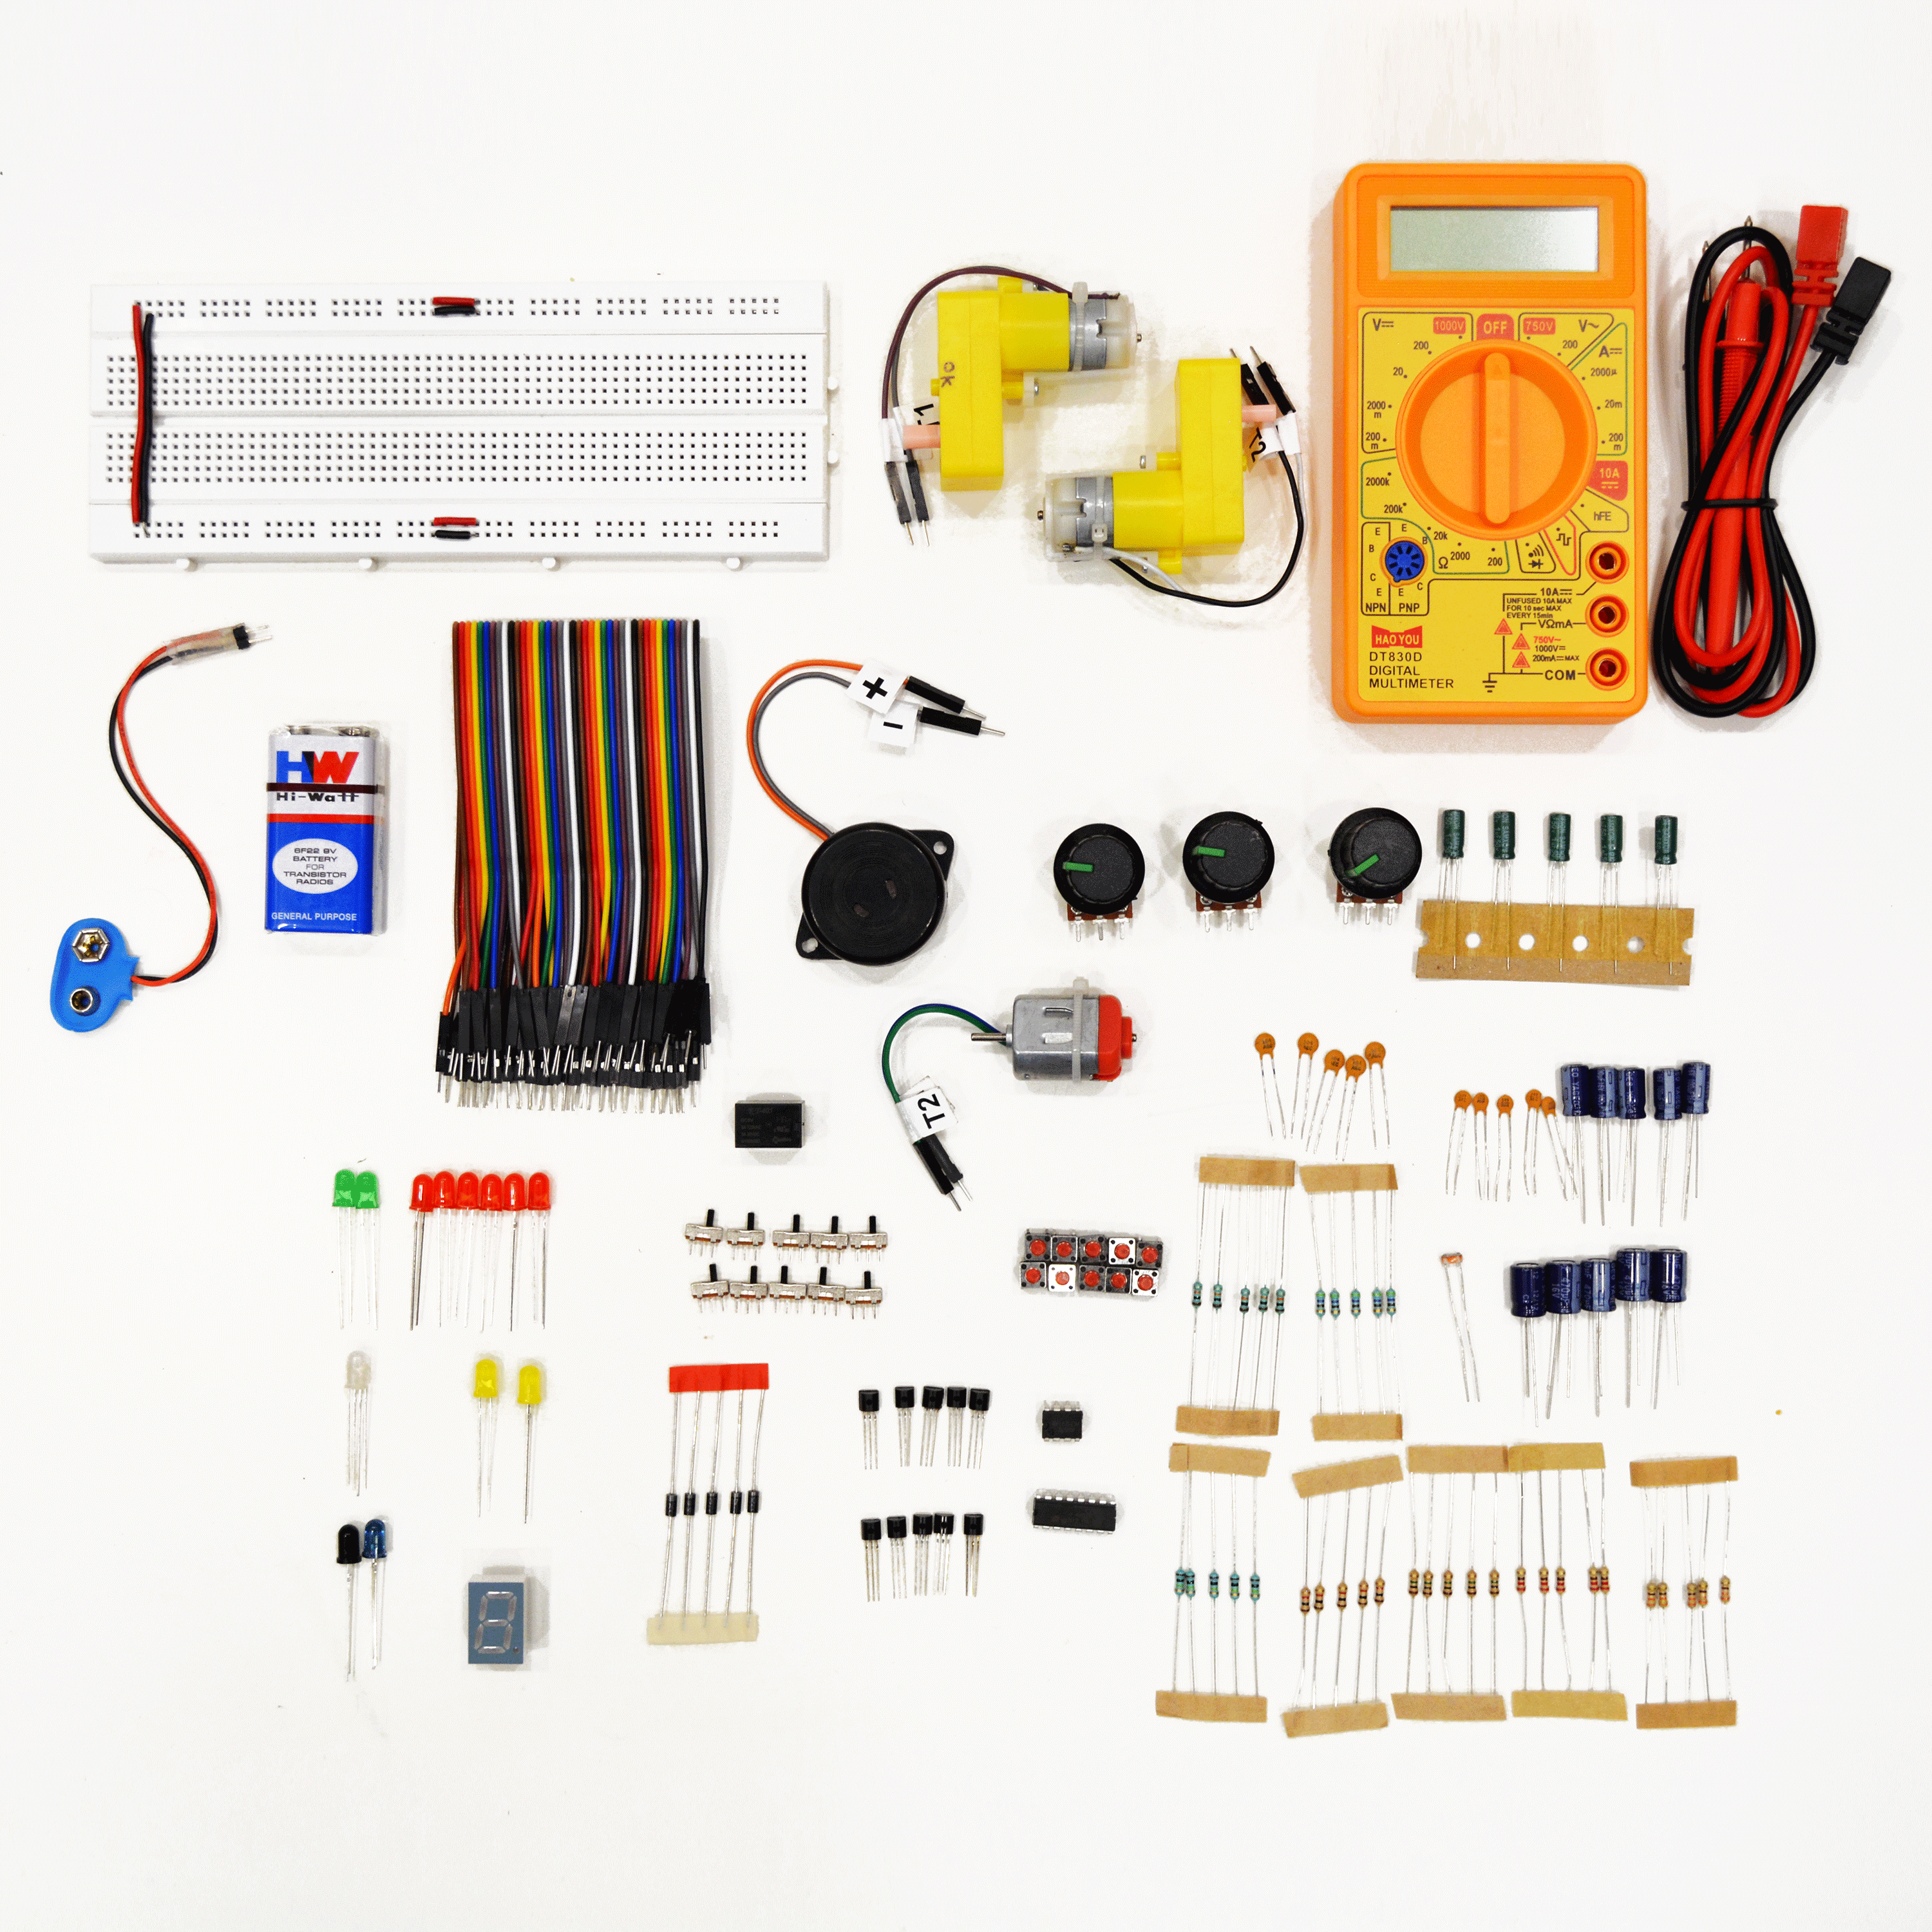 Omotec Electronics Learning Kit for 9+ (Experiential Learning, 1, White)_4